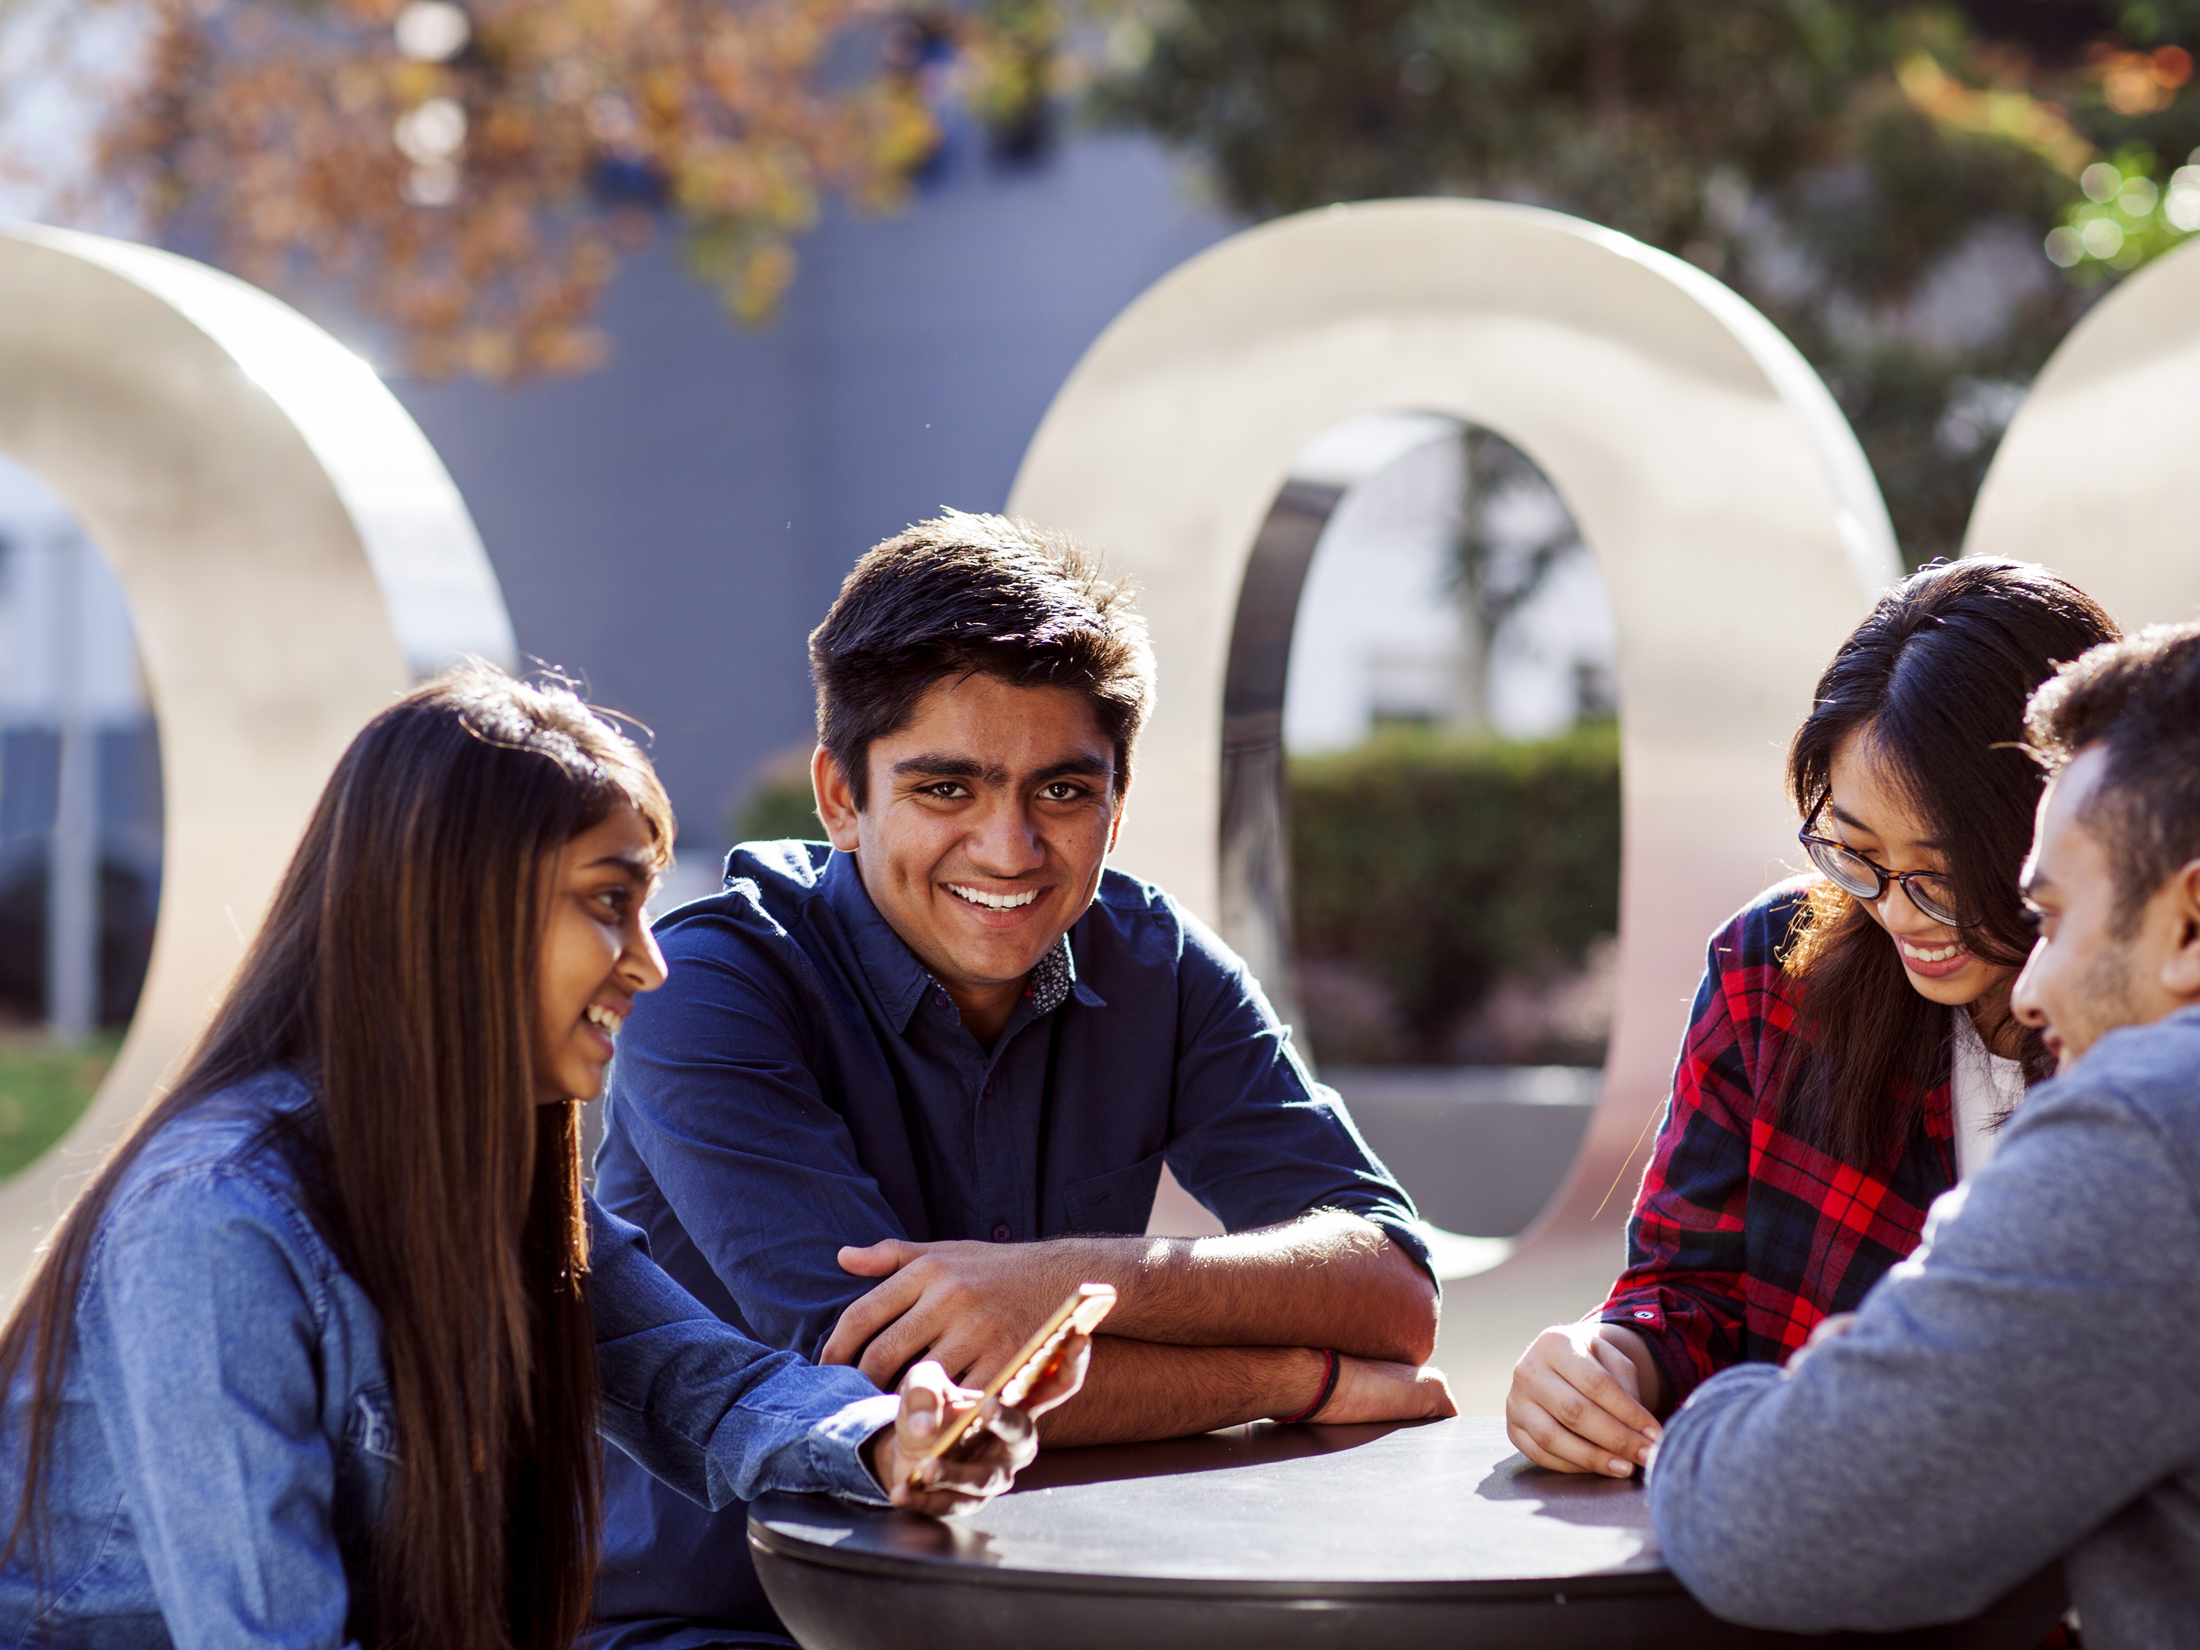 Group of four students sitting together on campus